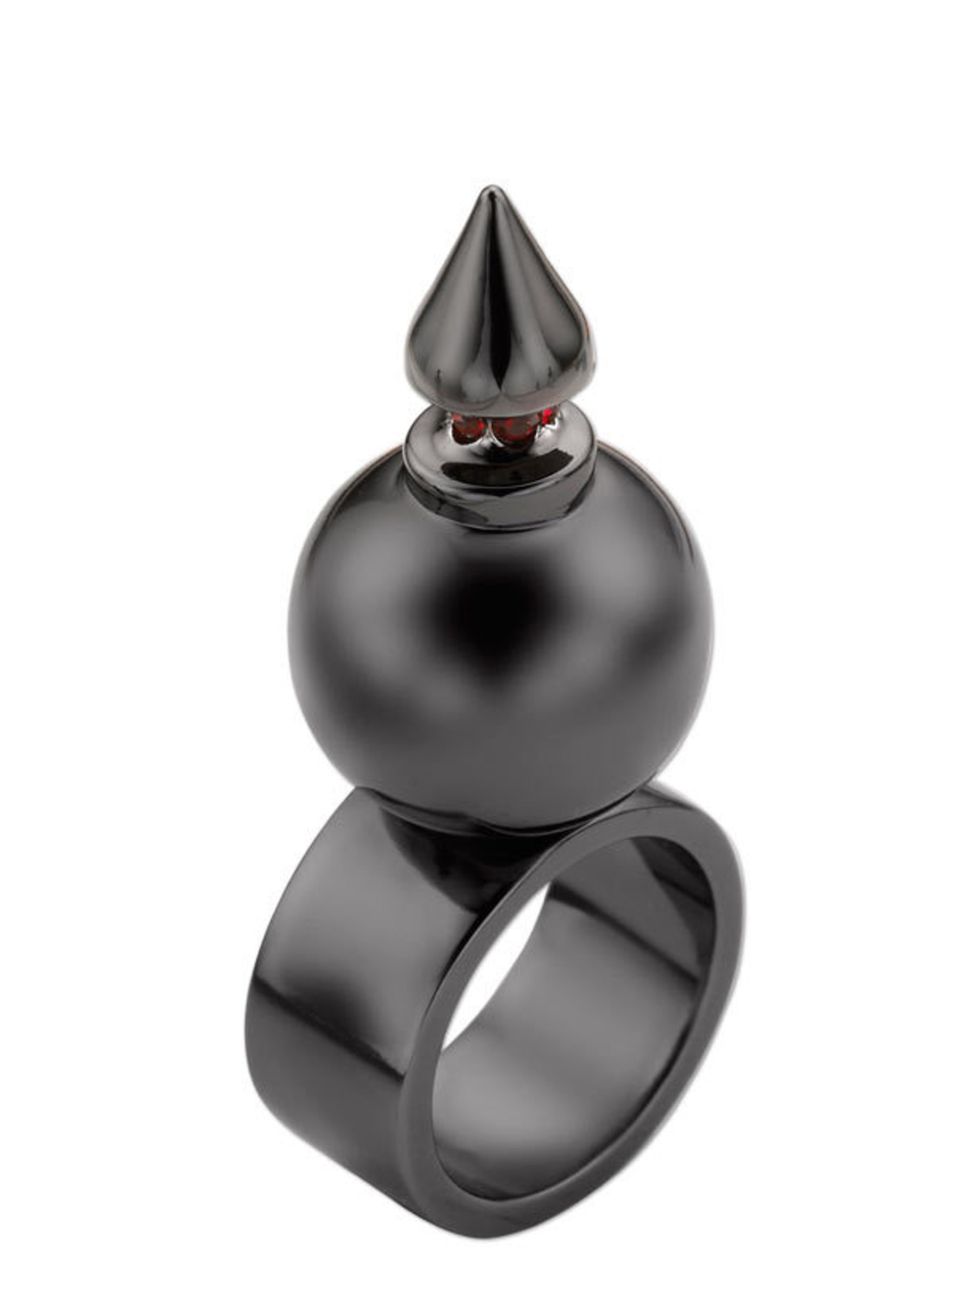 <p>Mawi dome spike hematite ring, £272, at <a href="http://www.kabiri.co.uk/dome-spike-hematite-ring.html">Kabiri</a></p>